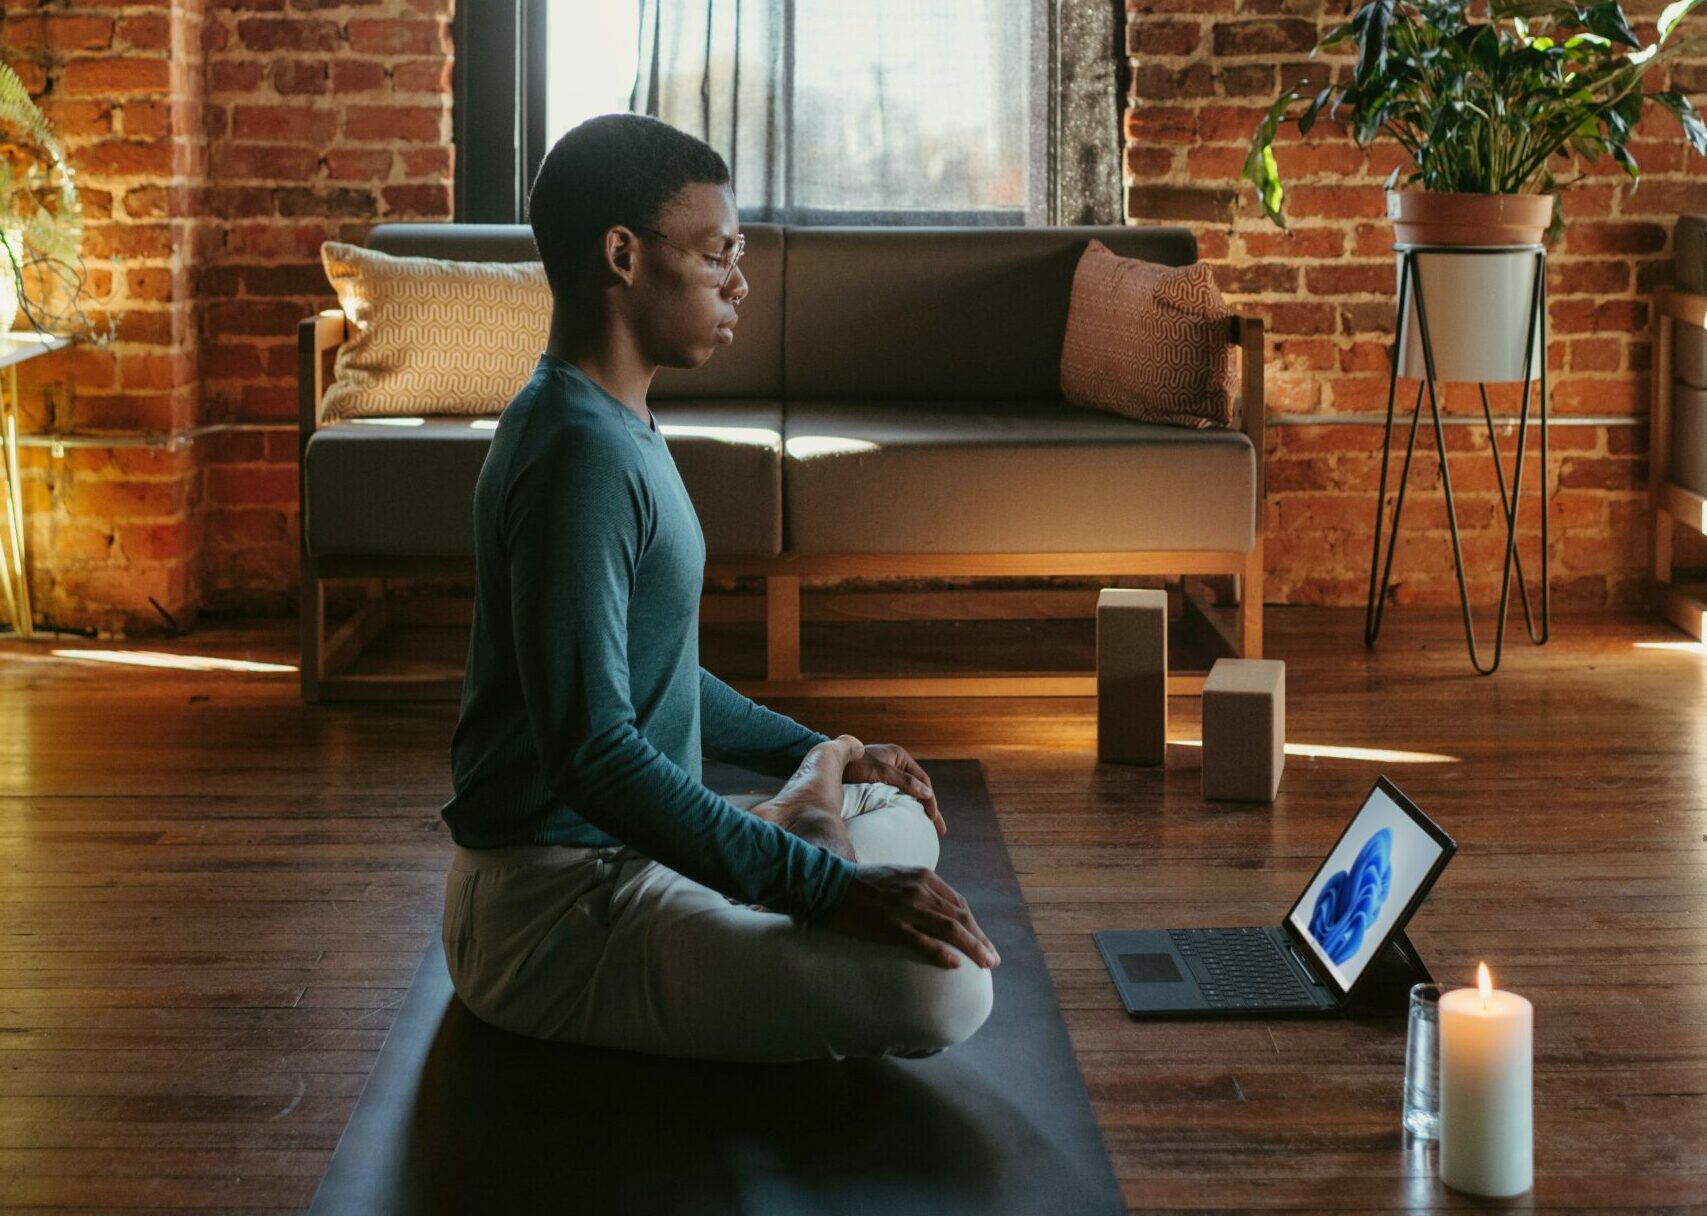 A young man seated on the floor doing an online meditation